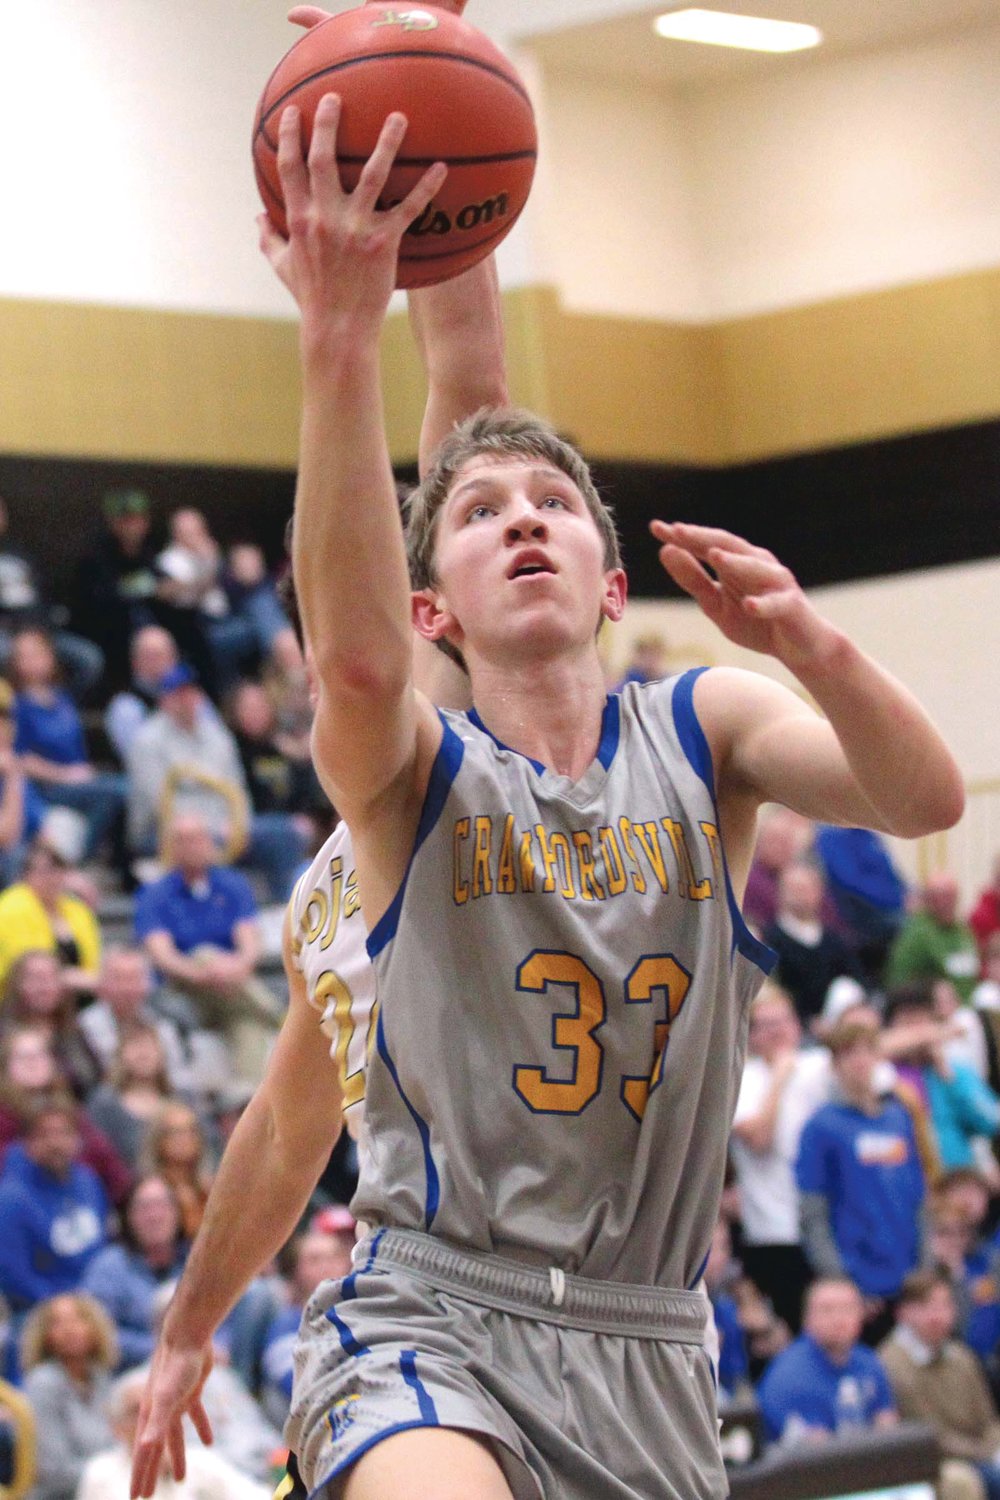 Crawfordsville's Ian Hensley returns over 8 points per game of scoring for the Athenians.